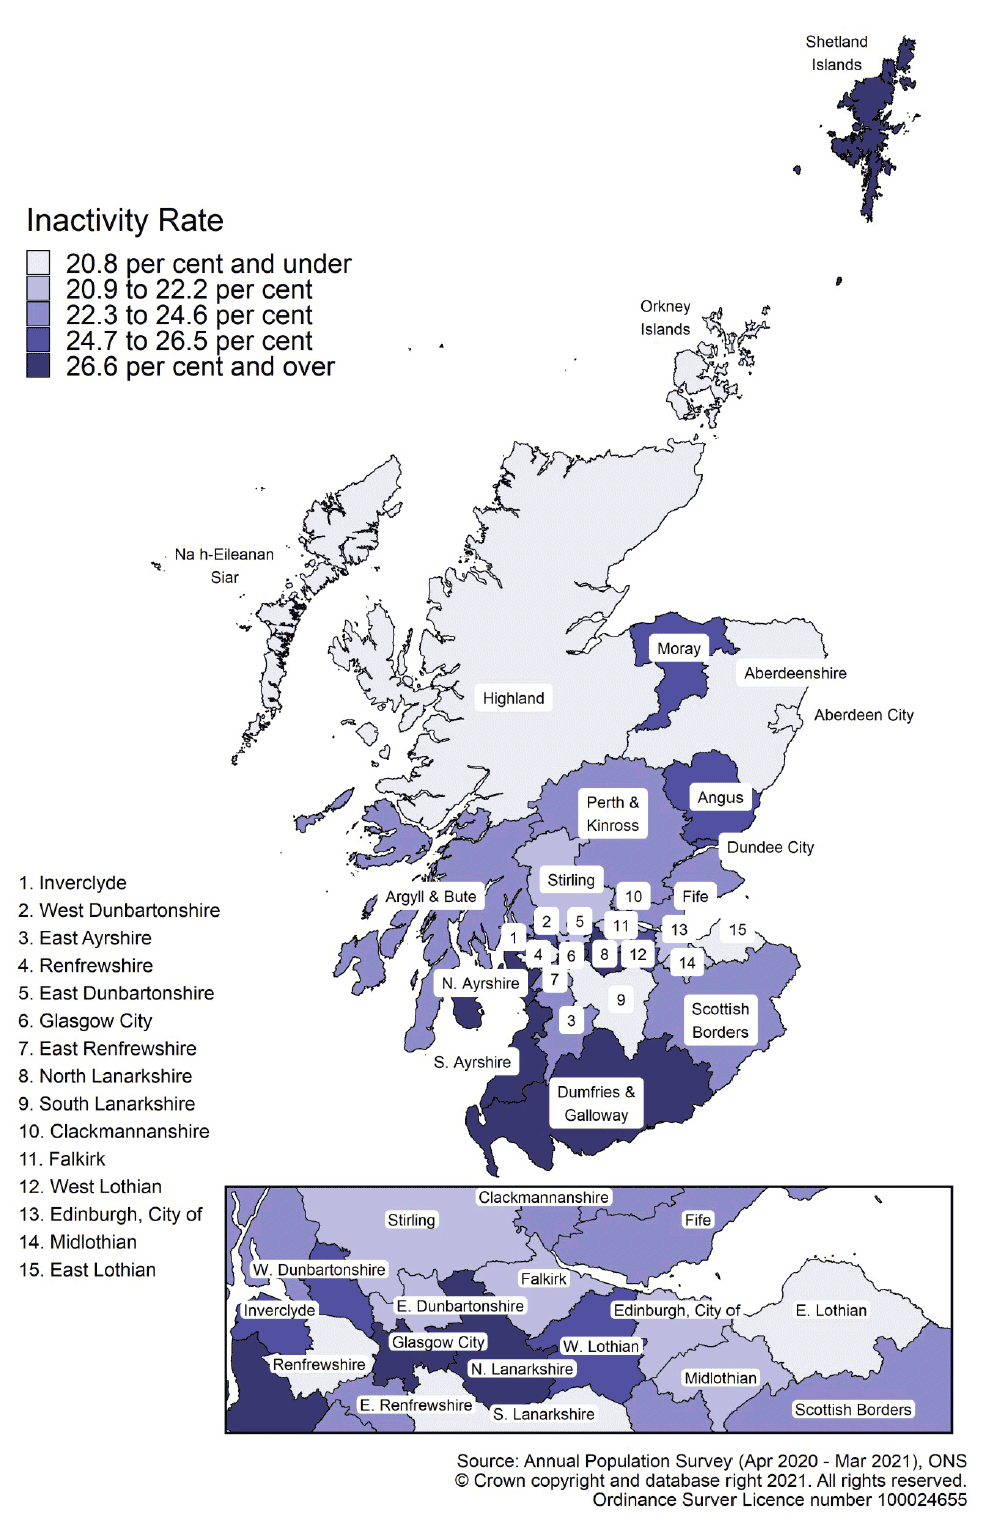 Map of Scotland showing inactivity rate ranges by local authority area for 16 to 64 year olds in April 2020 - March 2021